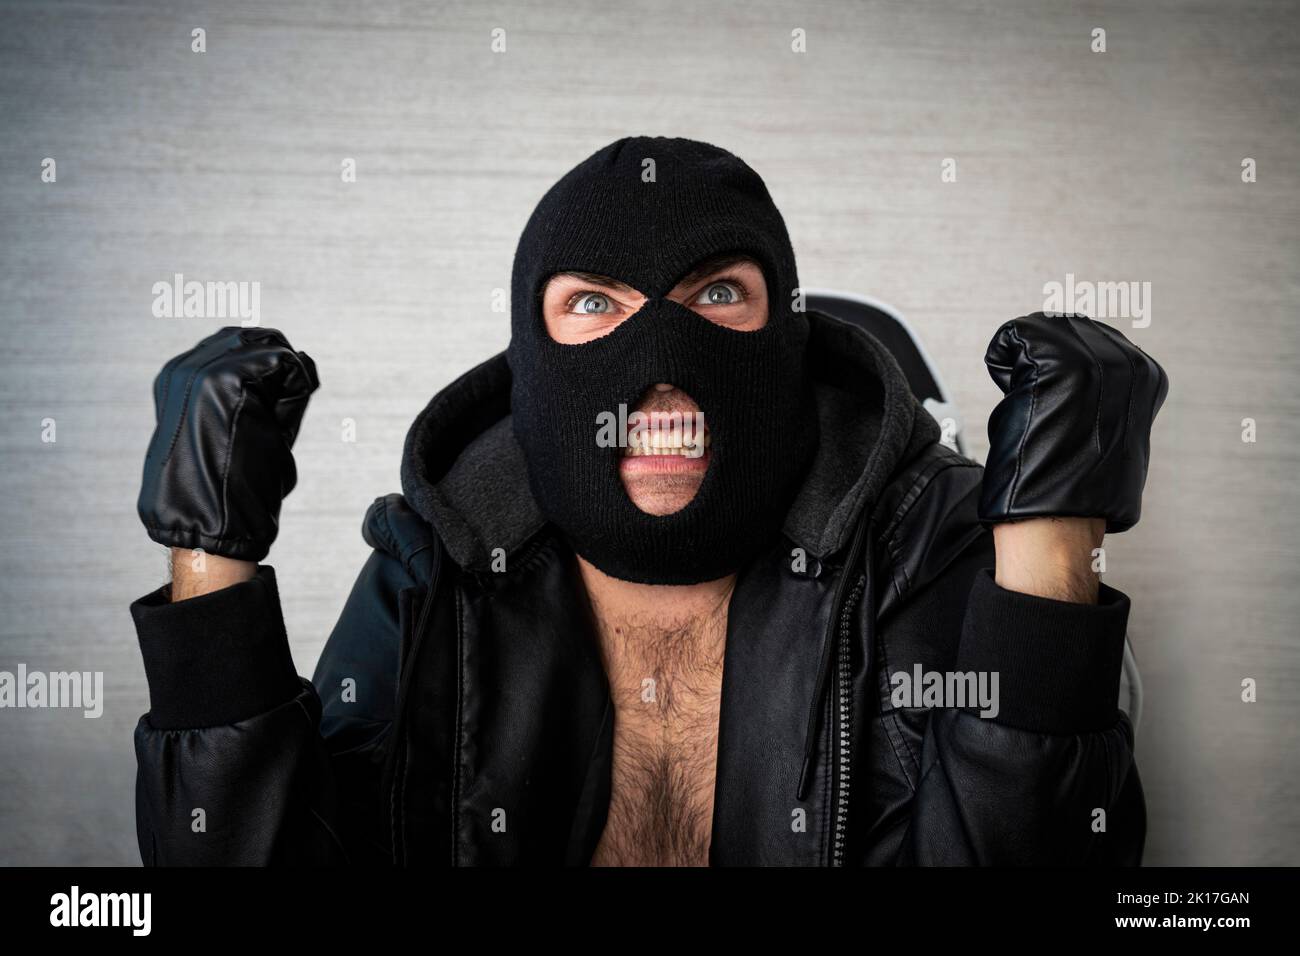 An angry aggressive masked thug screams in anger. Stock Photo